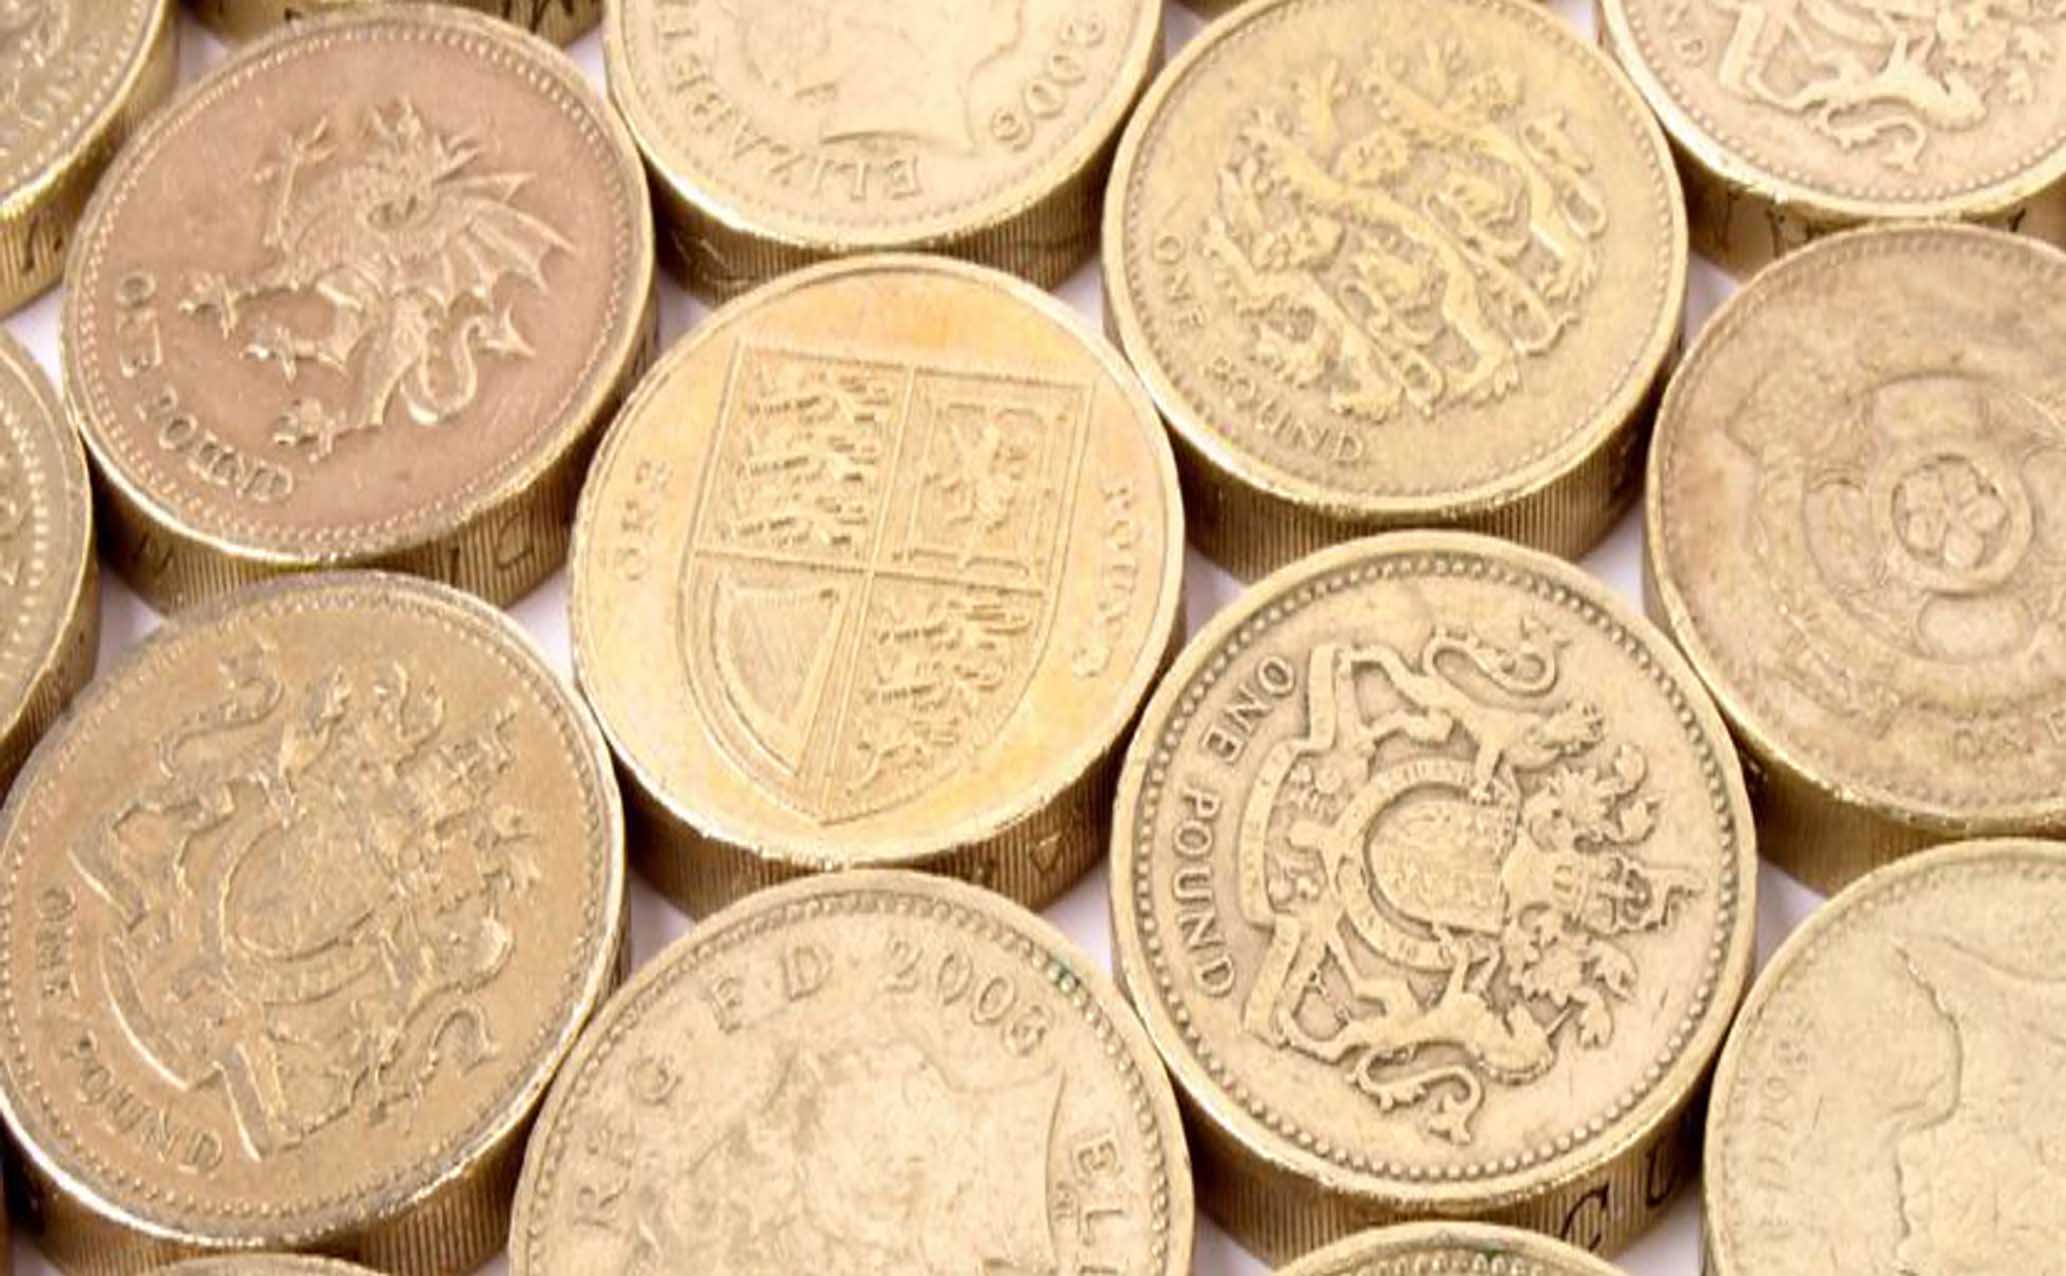 Collection of pound coins